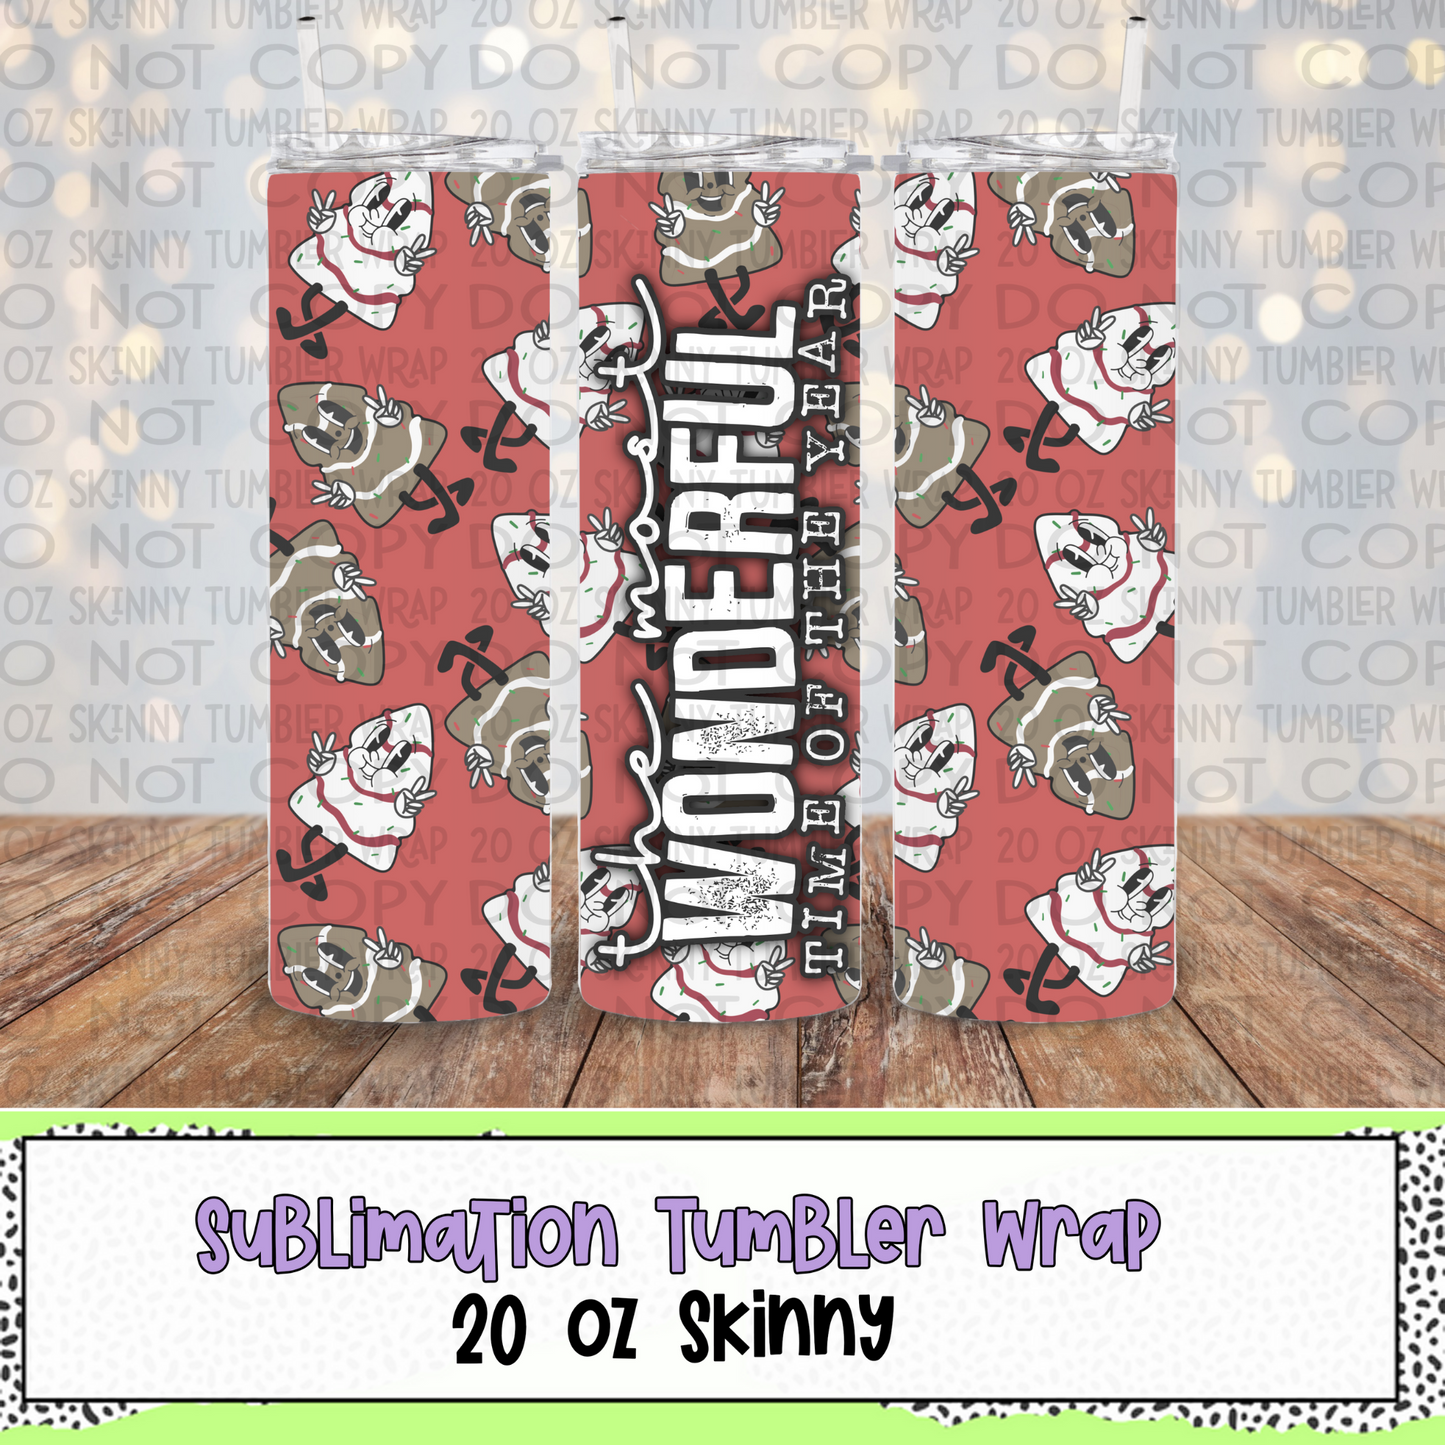 Most Wonderful Time of the Year 20 Oz Skinny Tumbler Wrap - Sublimation Transfer - RTS